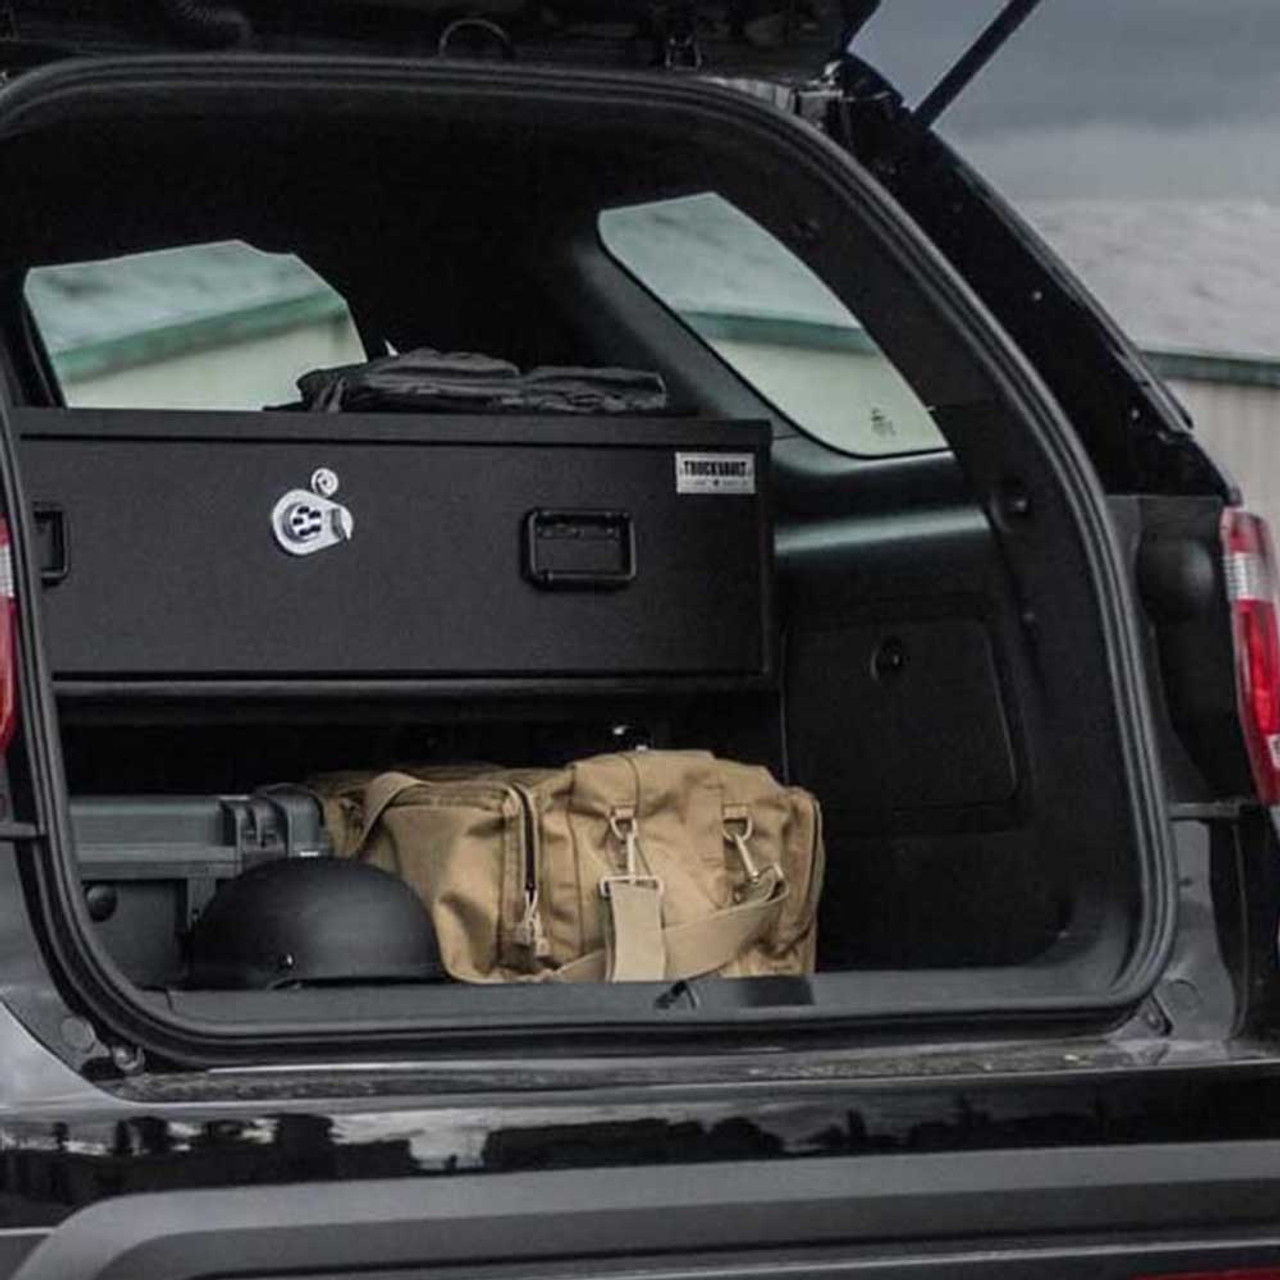 TruckVault Ford Expedition Elevated Series Drawer Storage Unit, 1 Drawer, Choose 6-10 inches Height, Includes Combo Lock and Dividers (2 Short & 2 Long), Carpeted Interior and Top, Still Access Spare Tire, Optional Foam and Rubber Mat